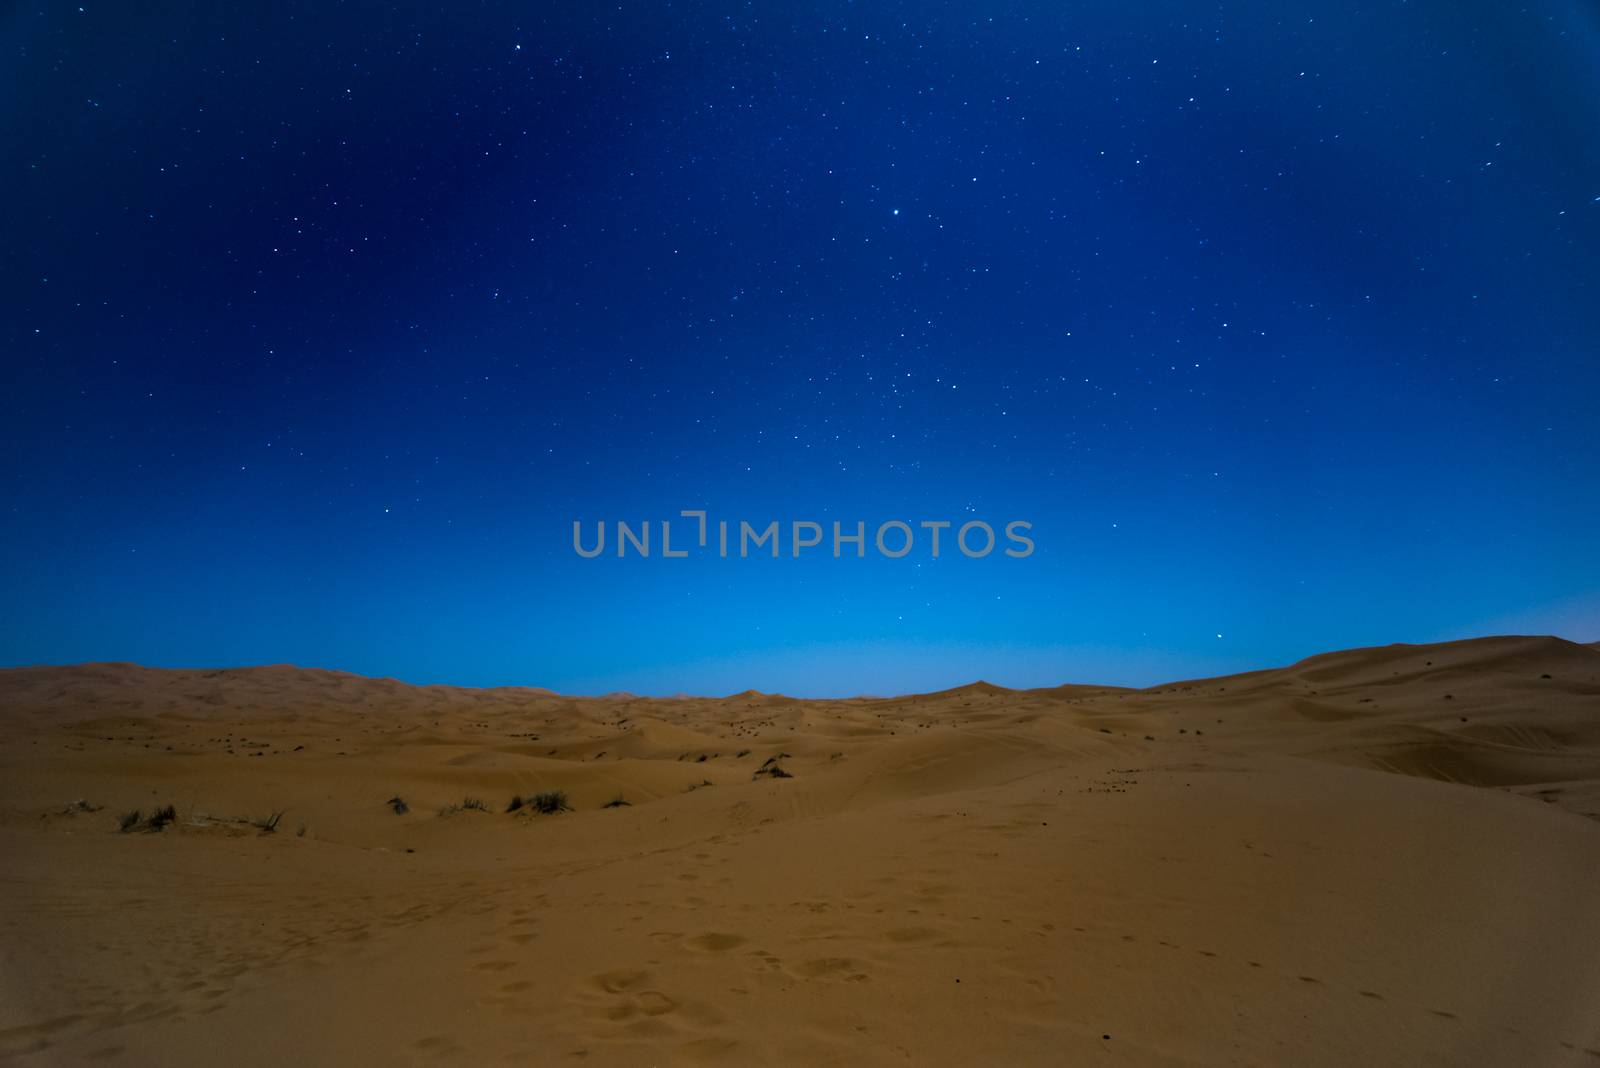 Stars at night over the dunes, Morocco by johnnychaos